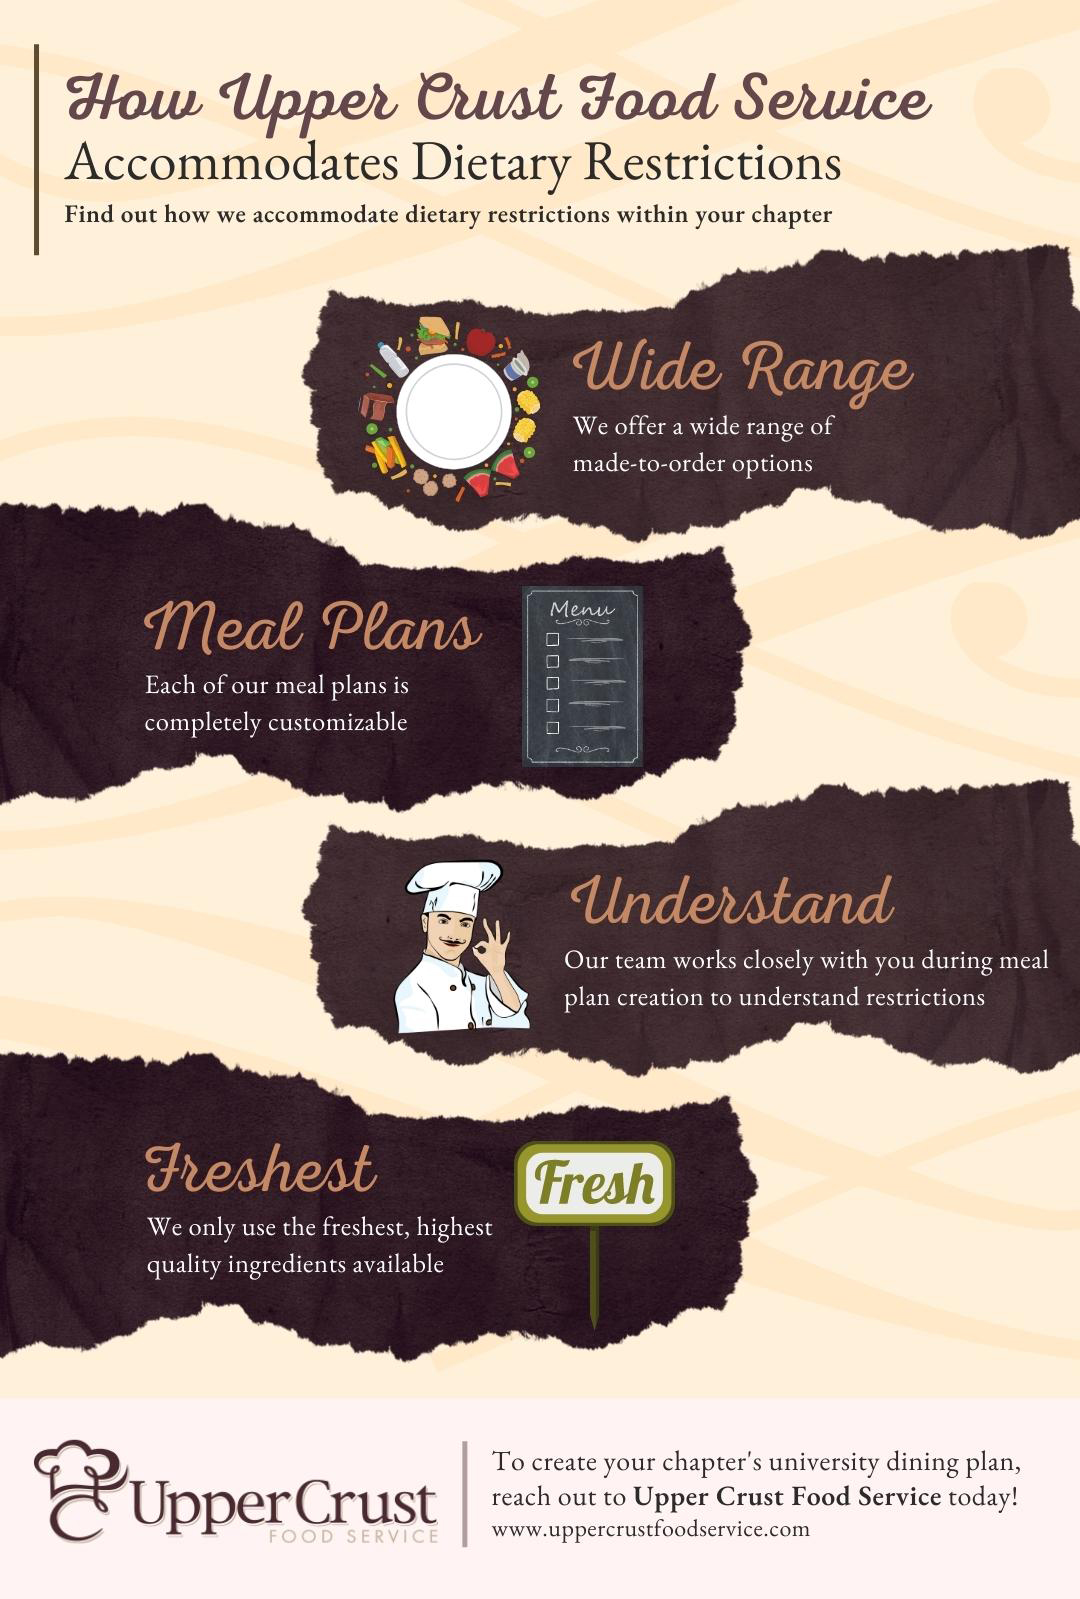 How Upper Crust Food Service Accommodates Dietary Restrictions Infographic